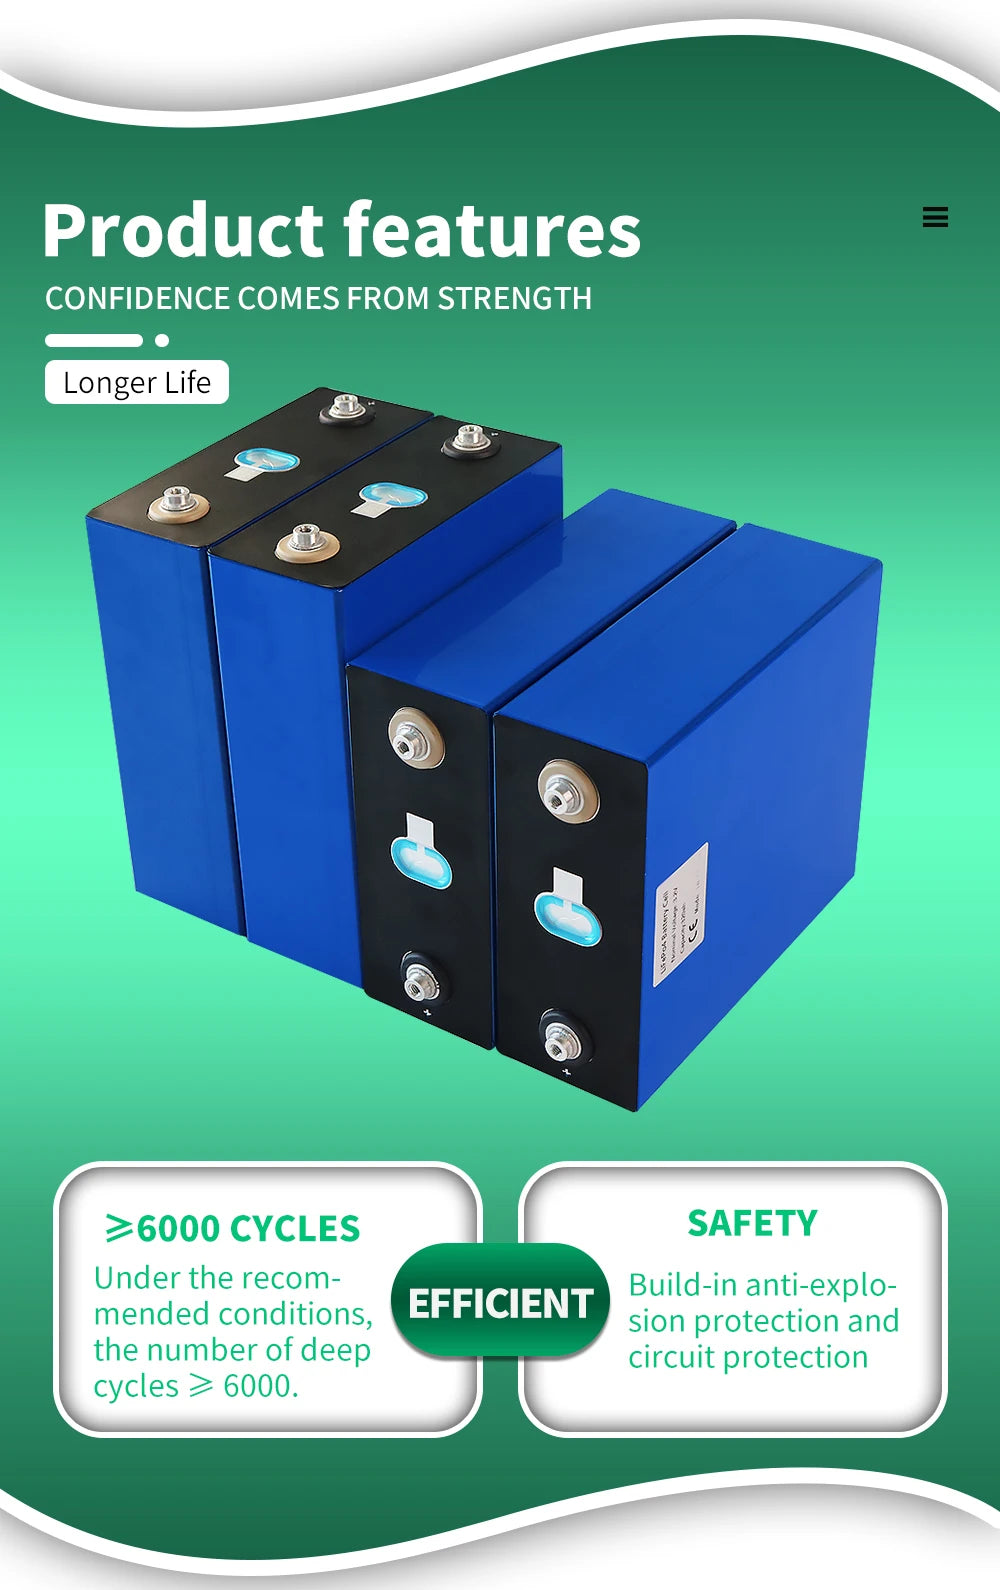 320AH Lifepo4 Battery, Reliable battery with long lifespan (6,000+ cycles), built-in explosion protection, and deep cycle safeguard.